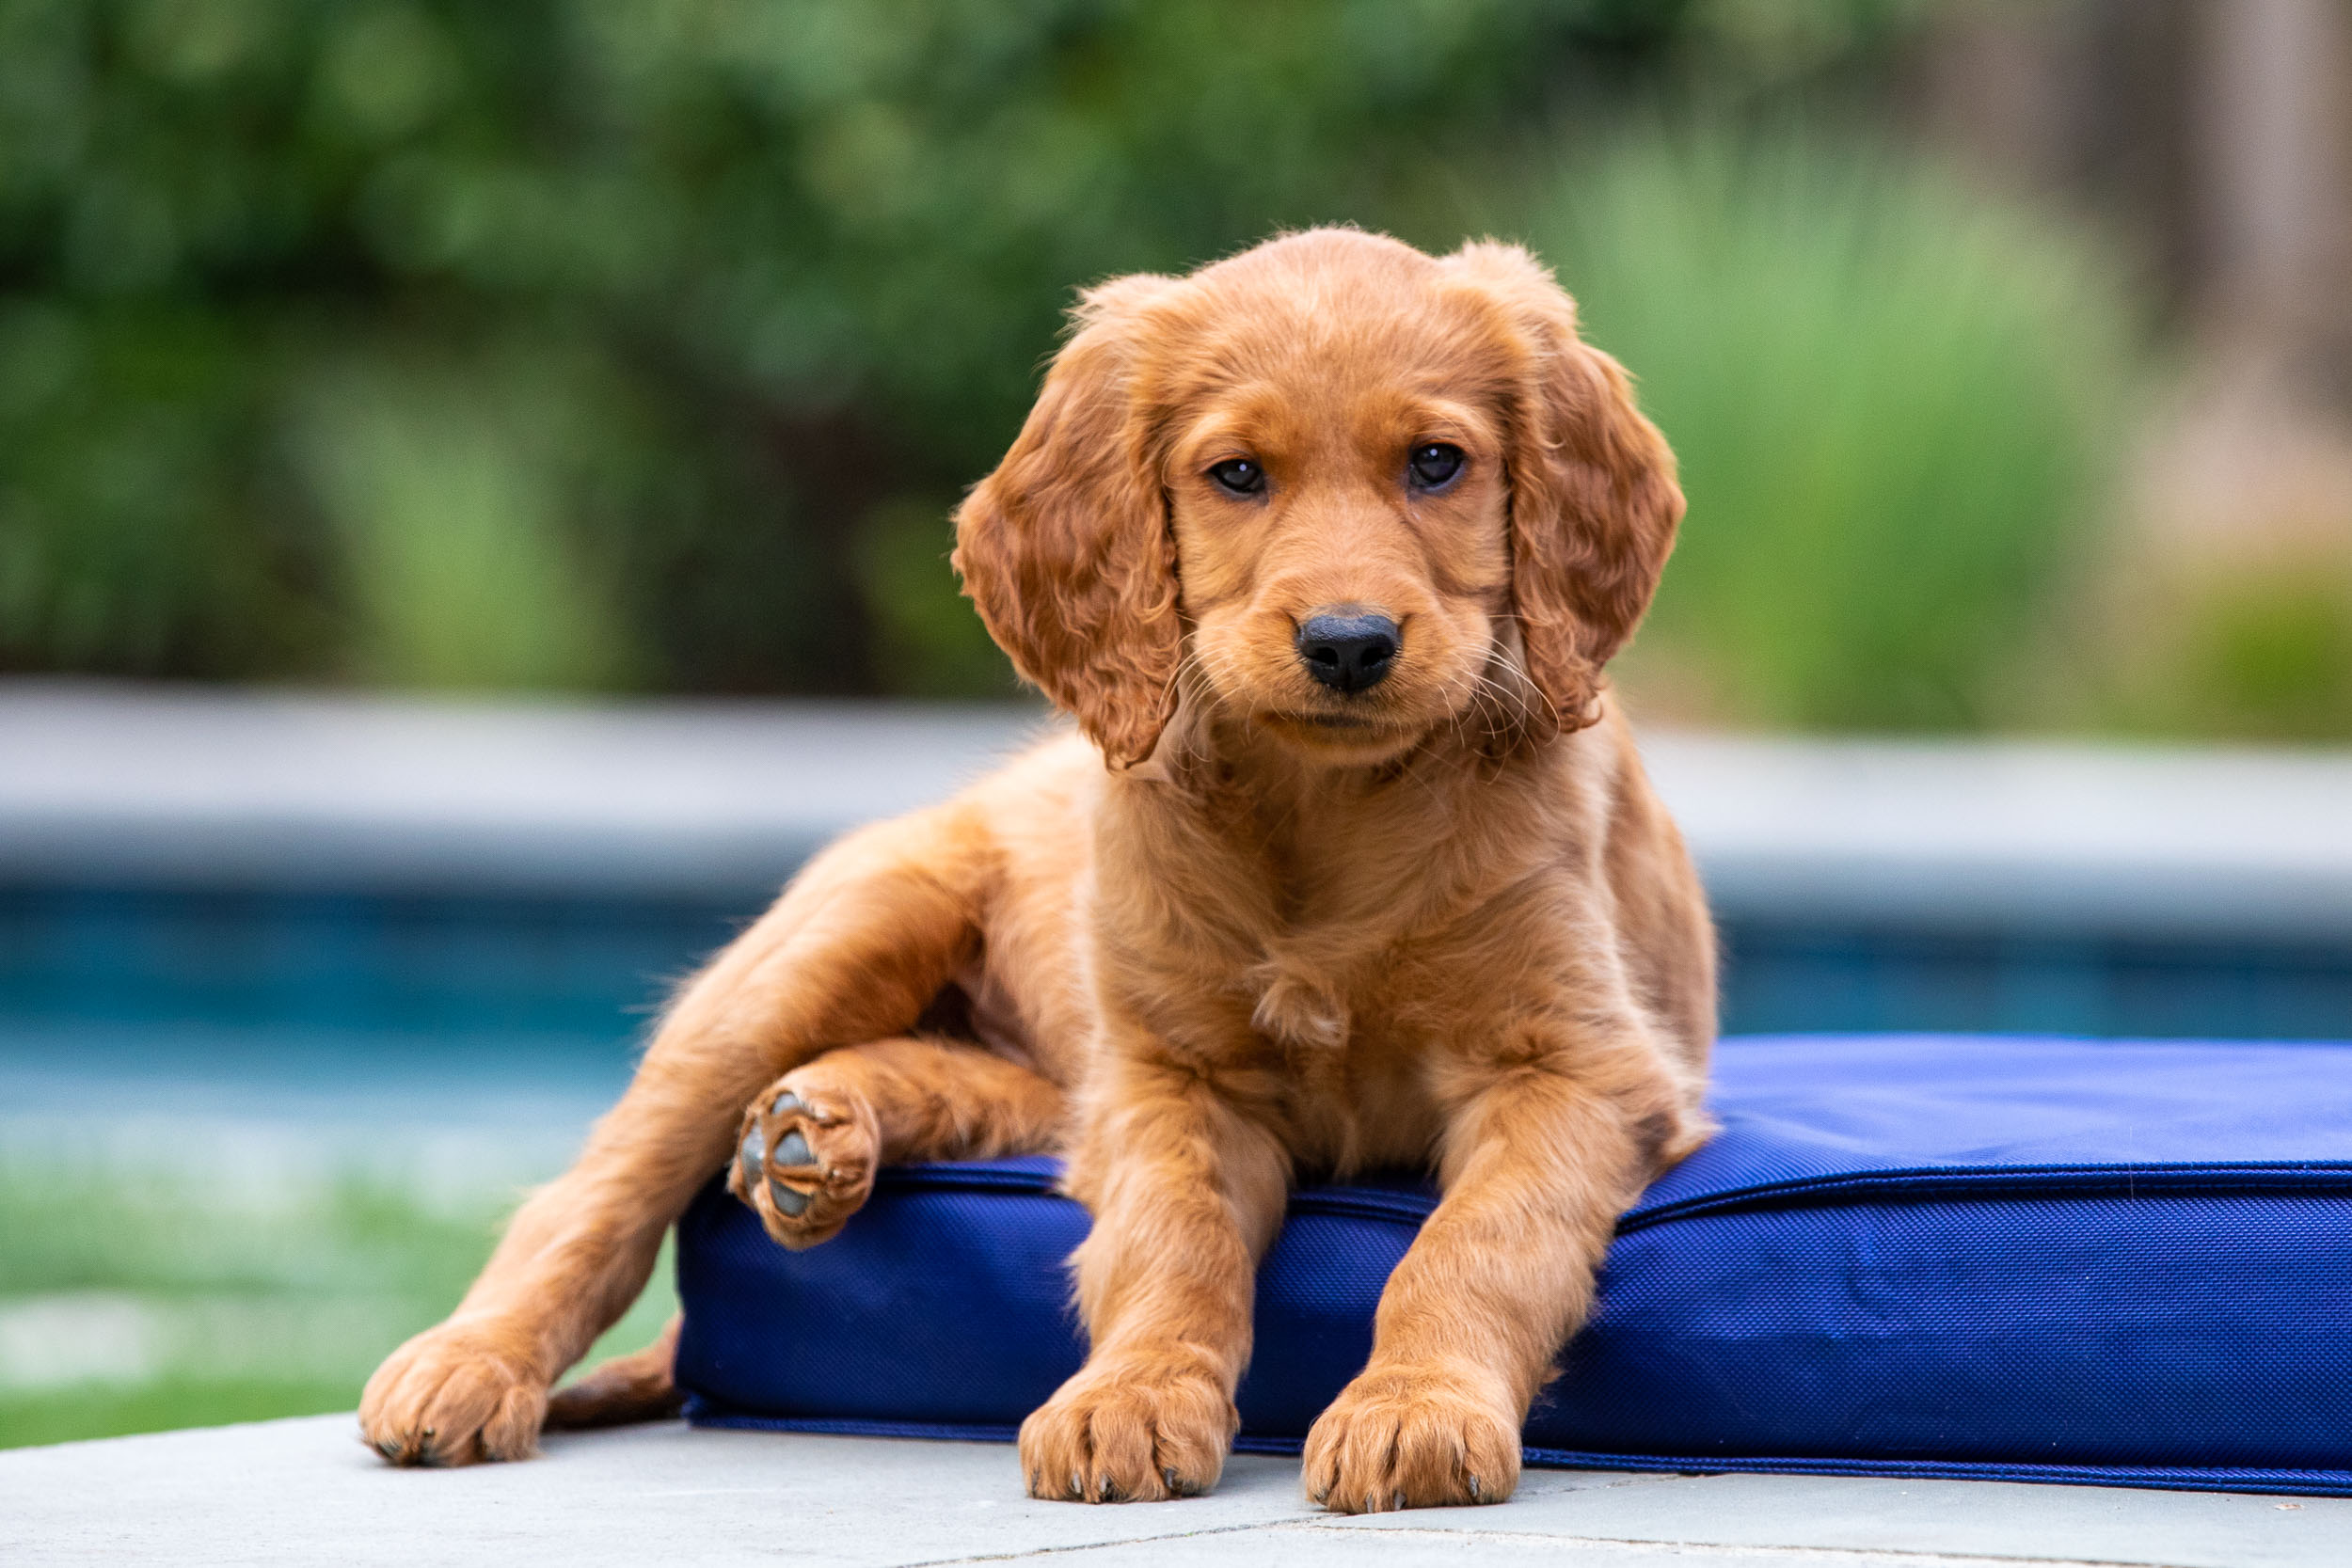 Golden Retriever Mix Puppy with Funny Expression Sitting on Dog Bed